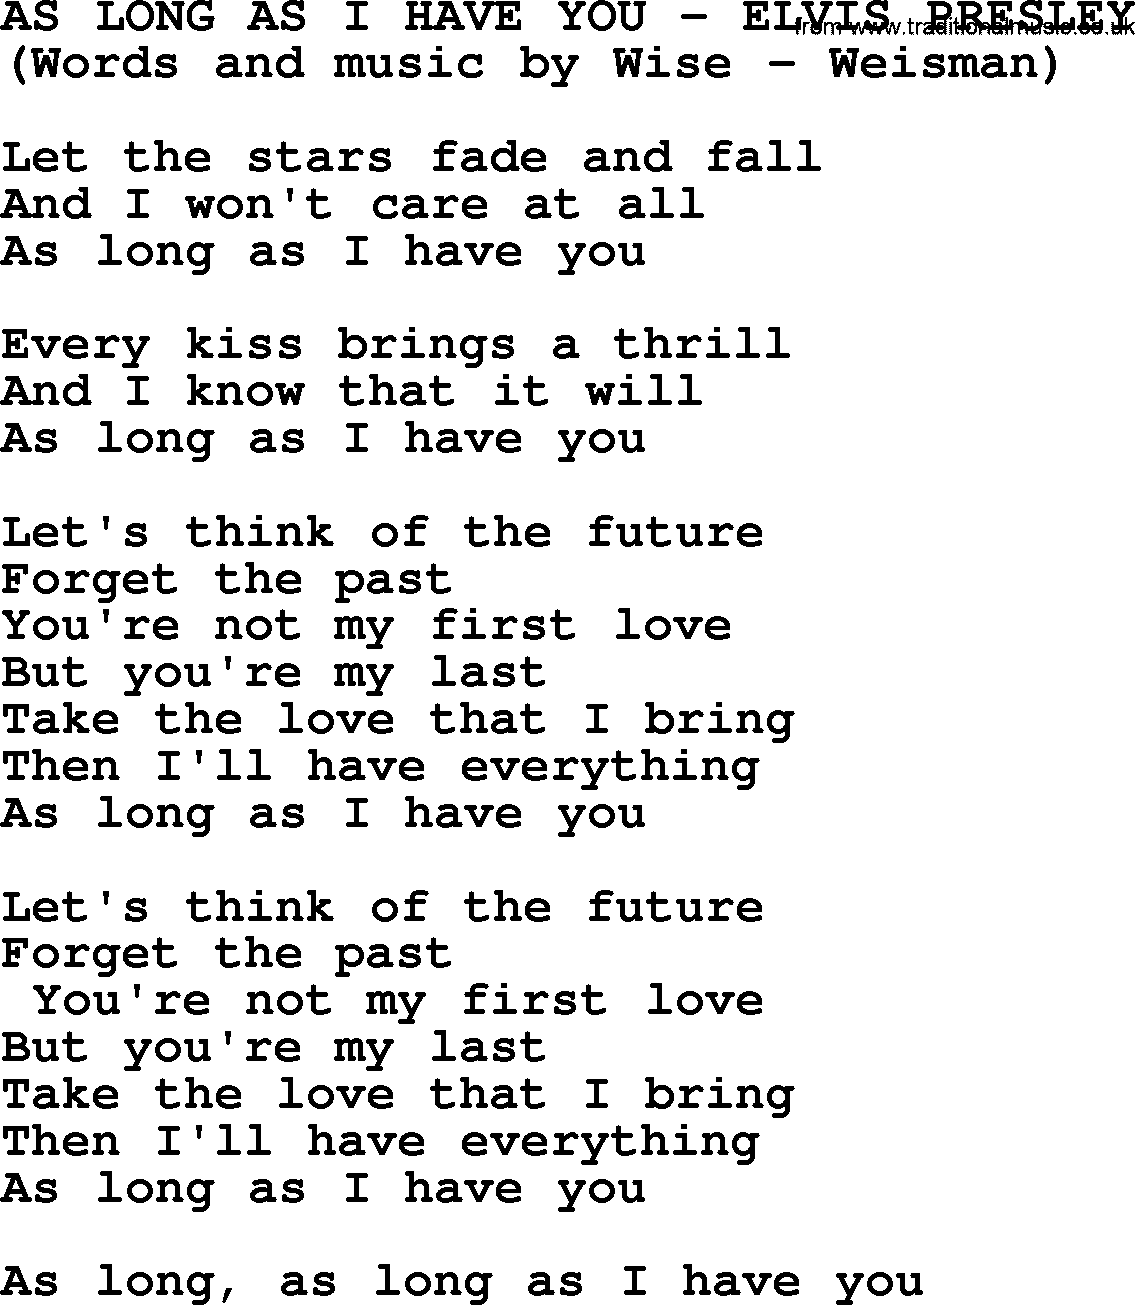 Elvis Presley song: As Long As I Have You lyrics